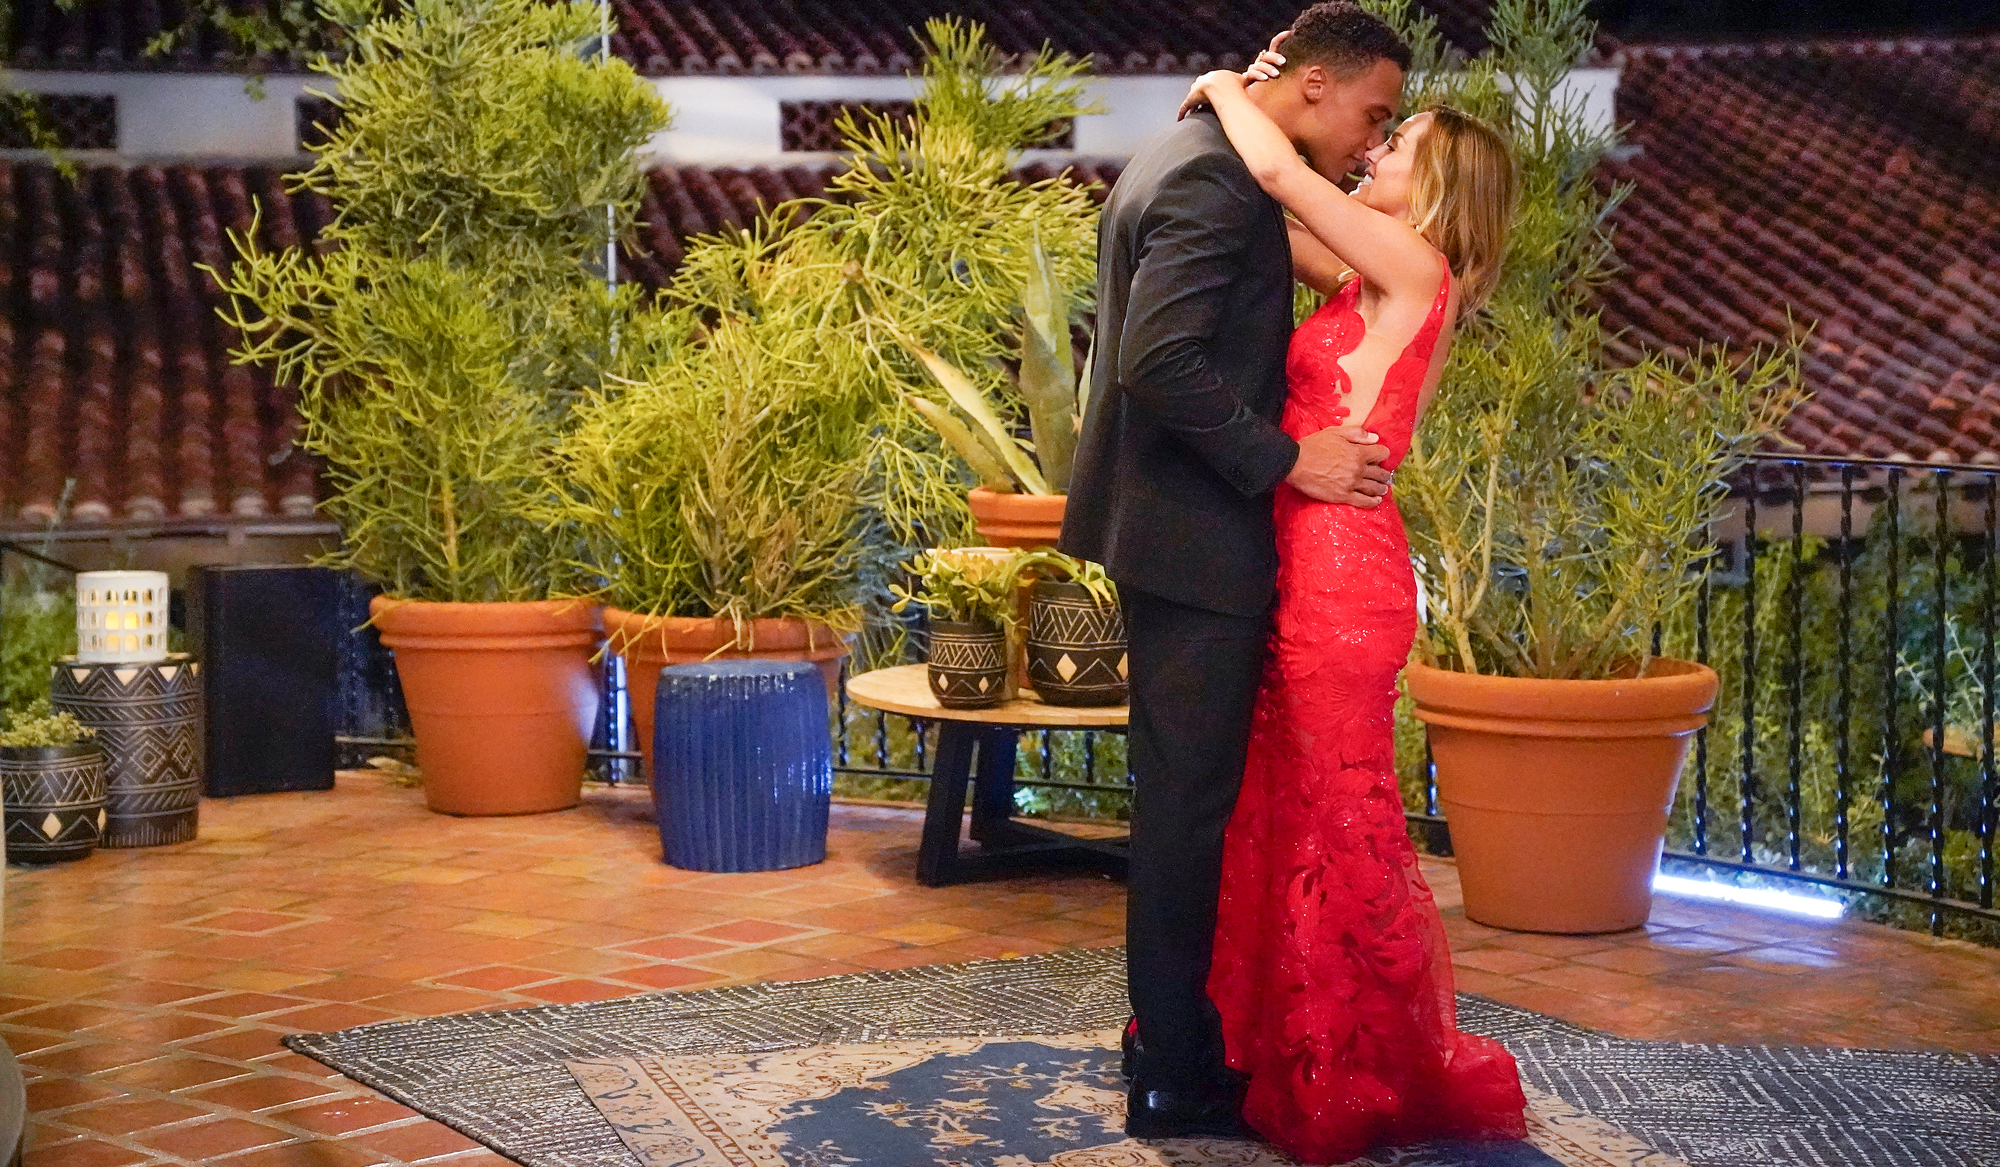 Dale Moss and Clare Crawley on 'The Bachelorette' Season 16 Episode 4